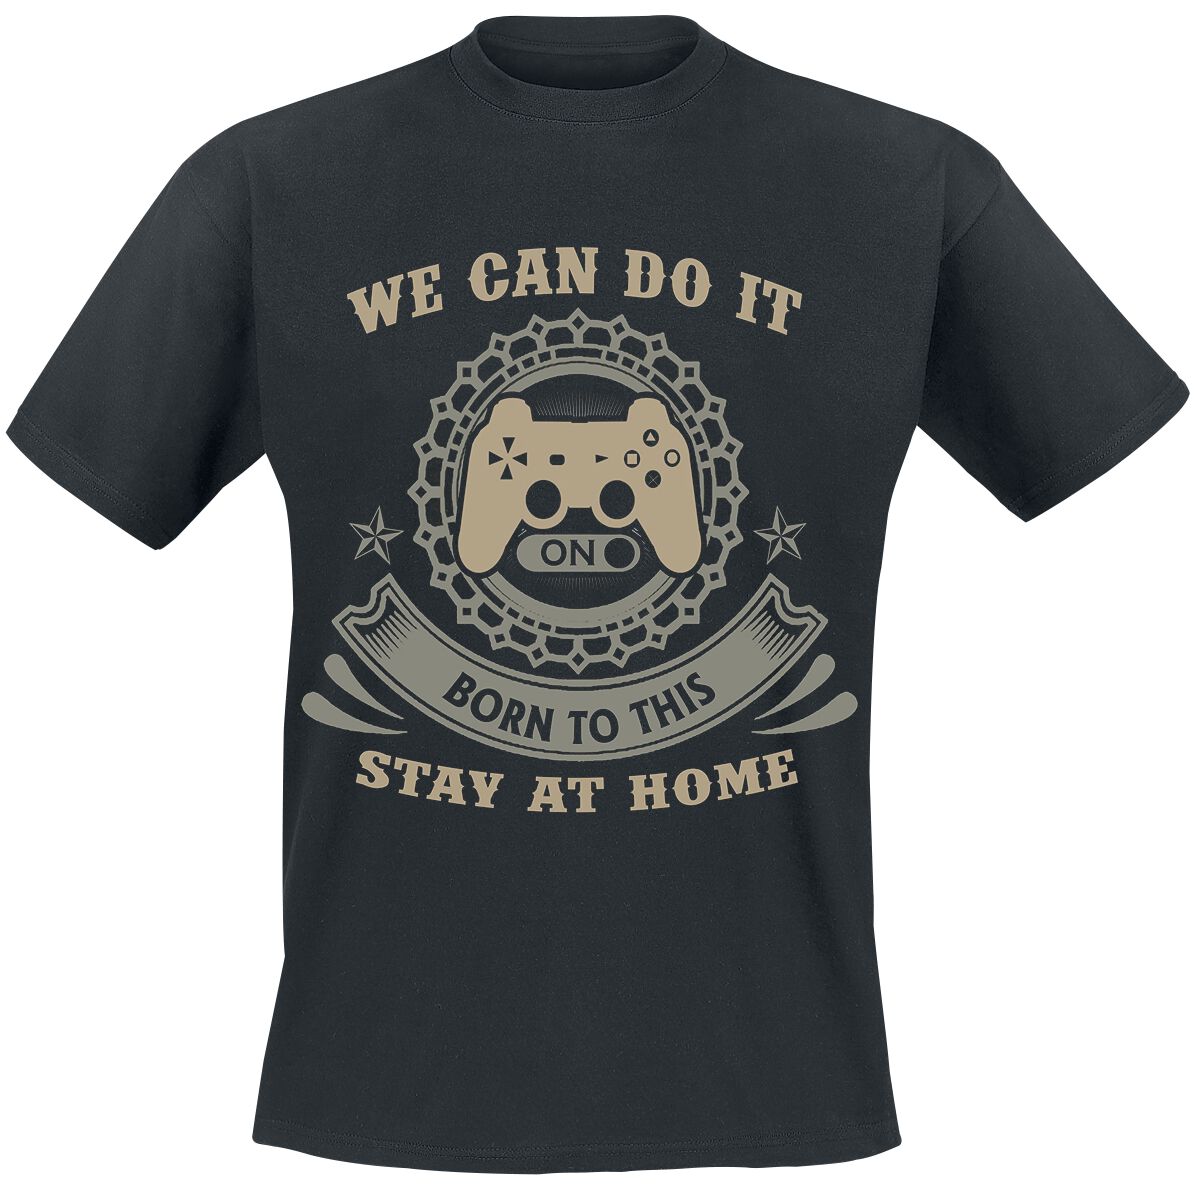 Fun Shirt We Can Do It - Born To This - Stay At Home T-Shirt black